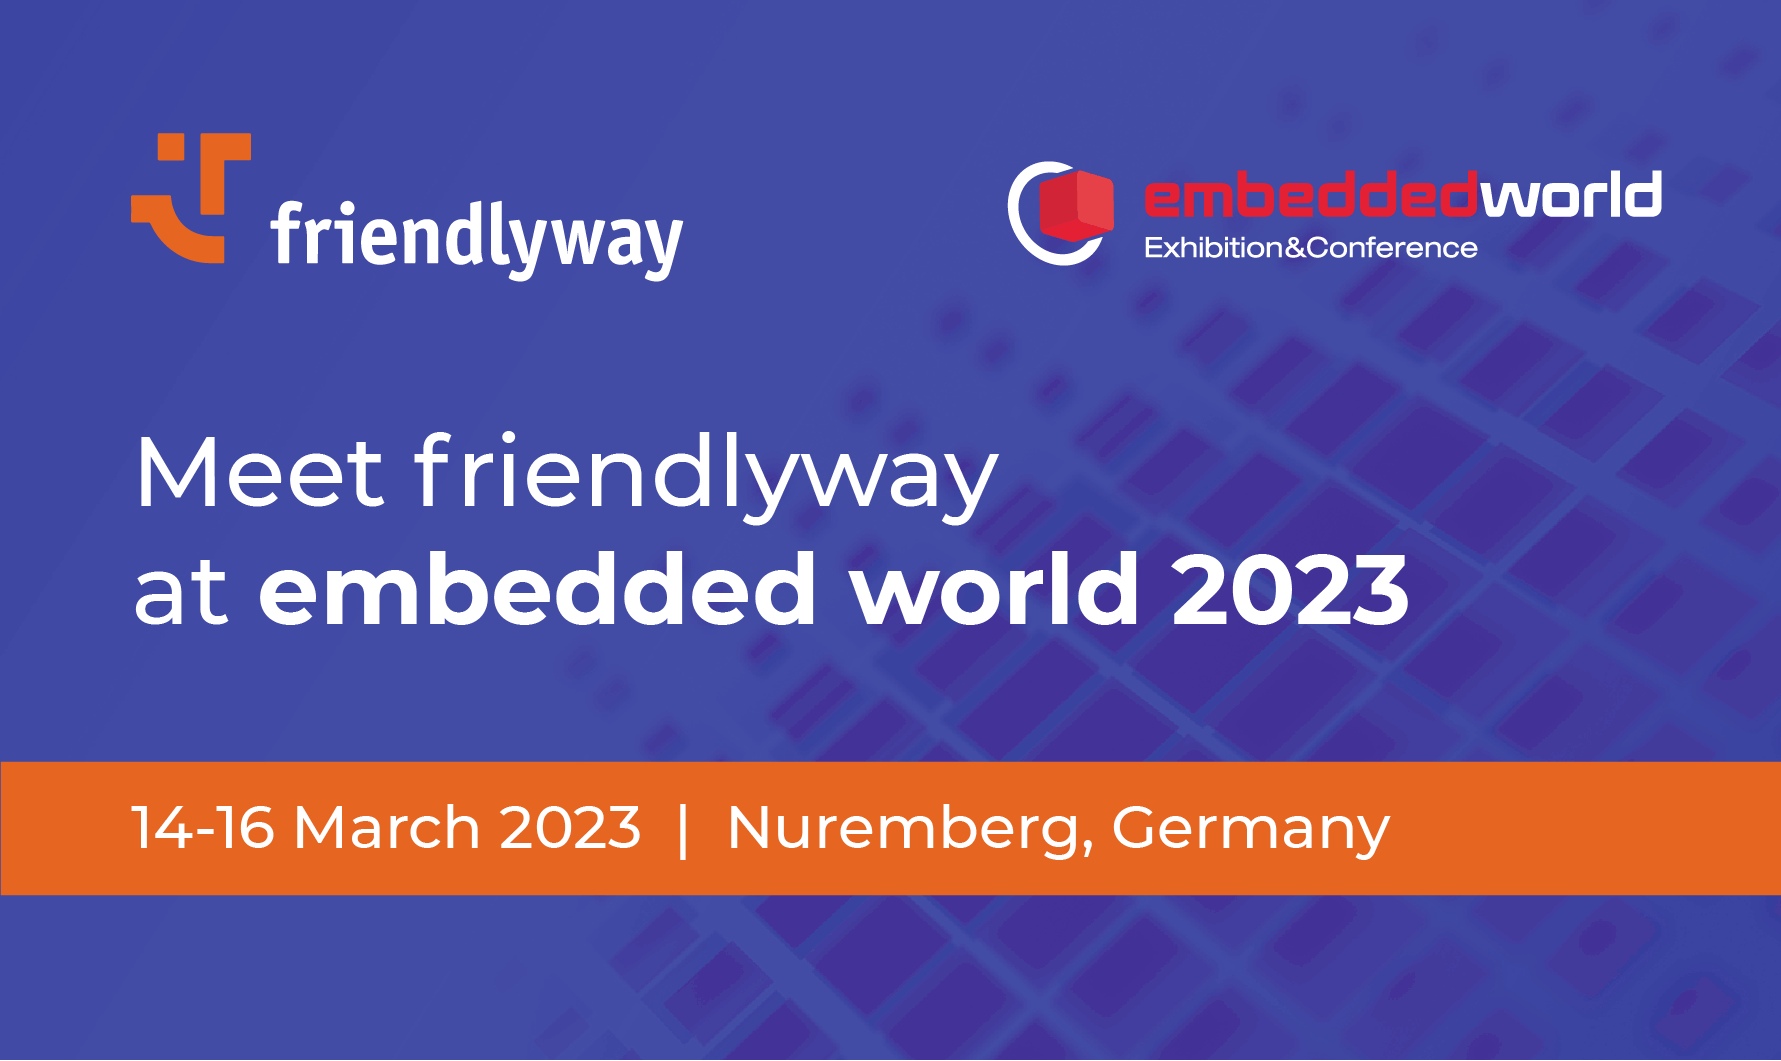 Embedded World Exhibition&Conference